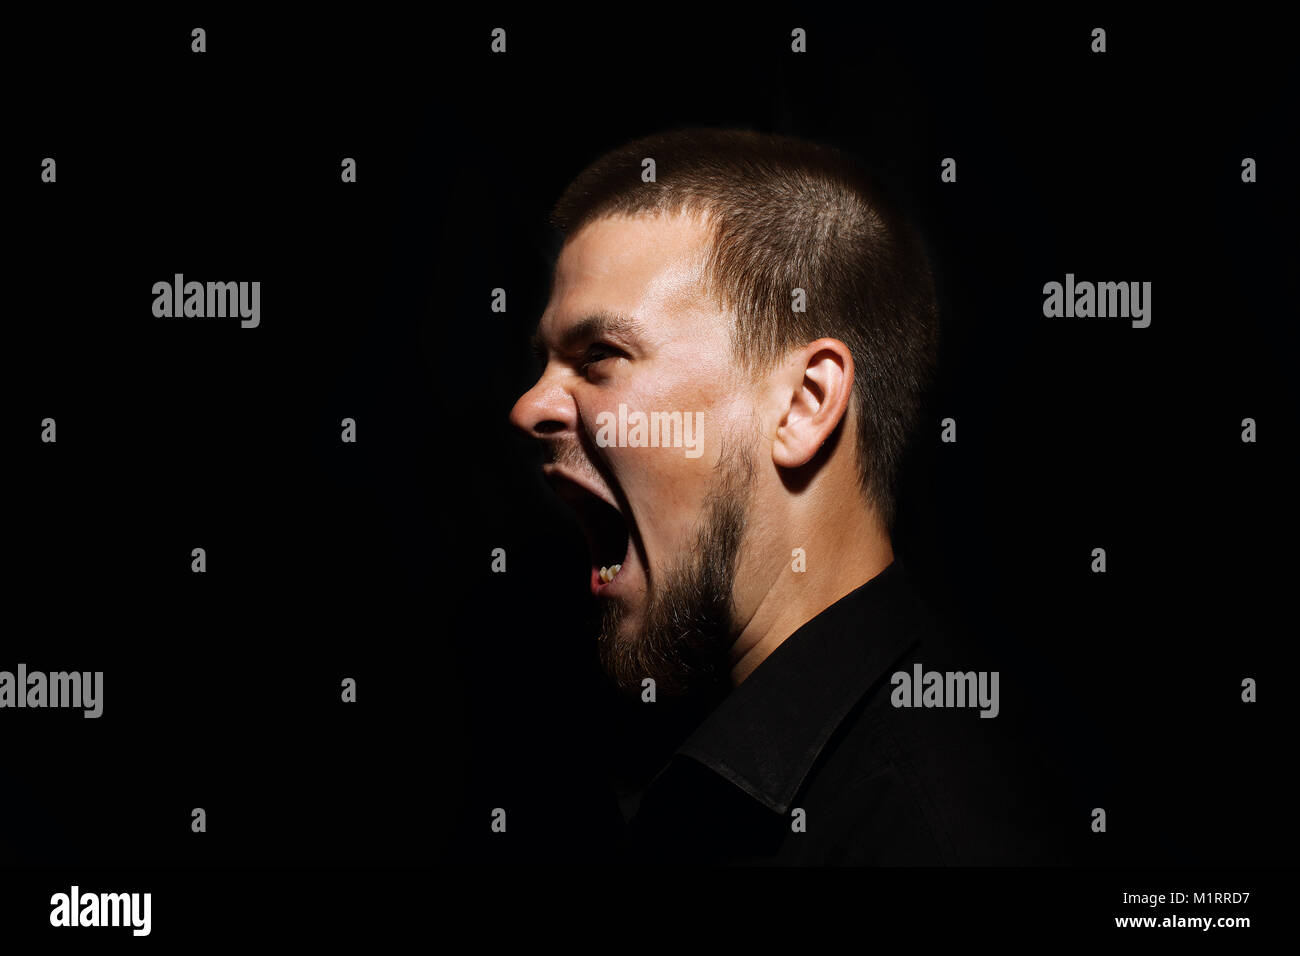 Scared face of spooky man in the dark. The man is yelling Stock Photo